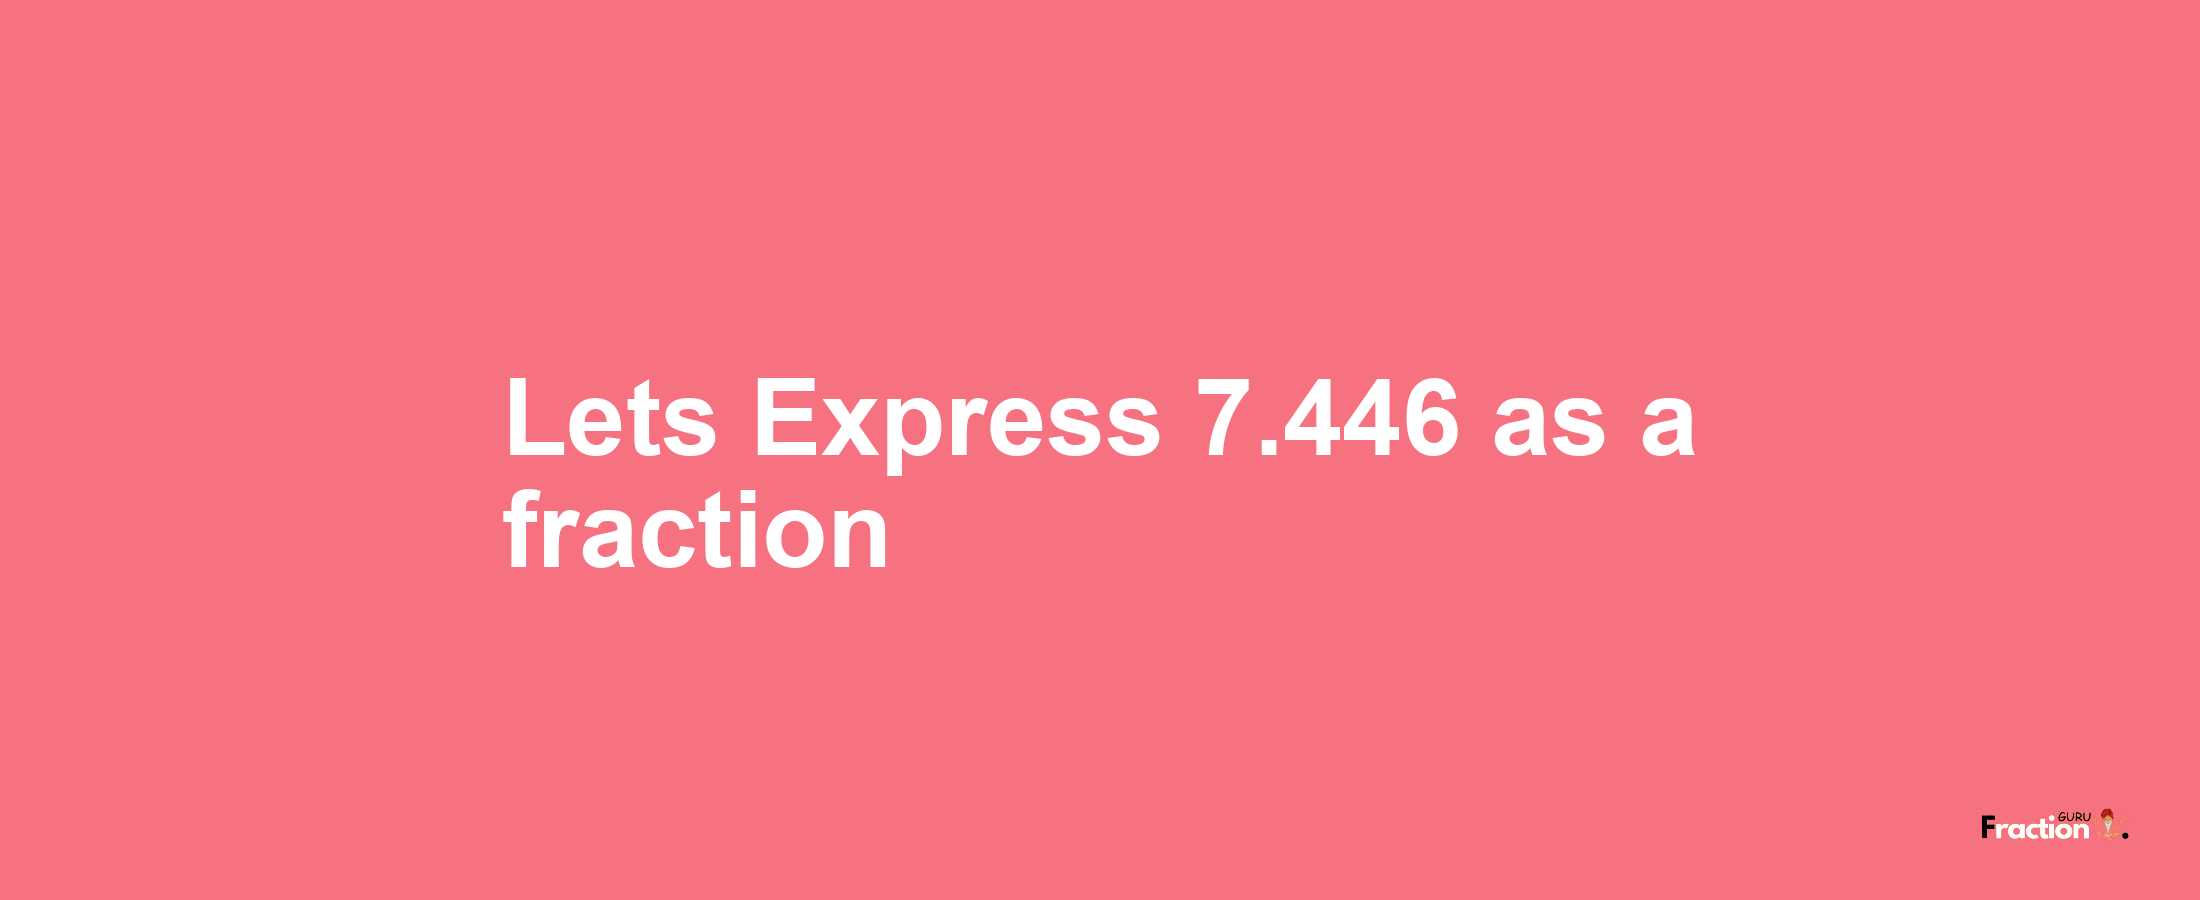 Lets Express 7.446 as afraction